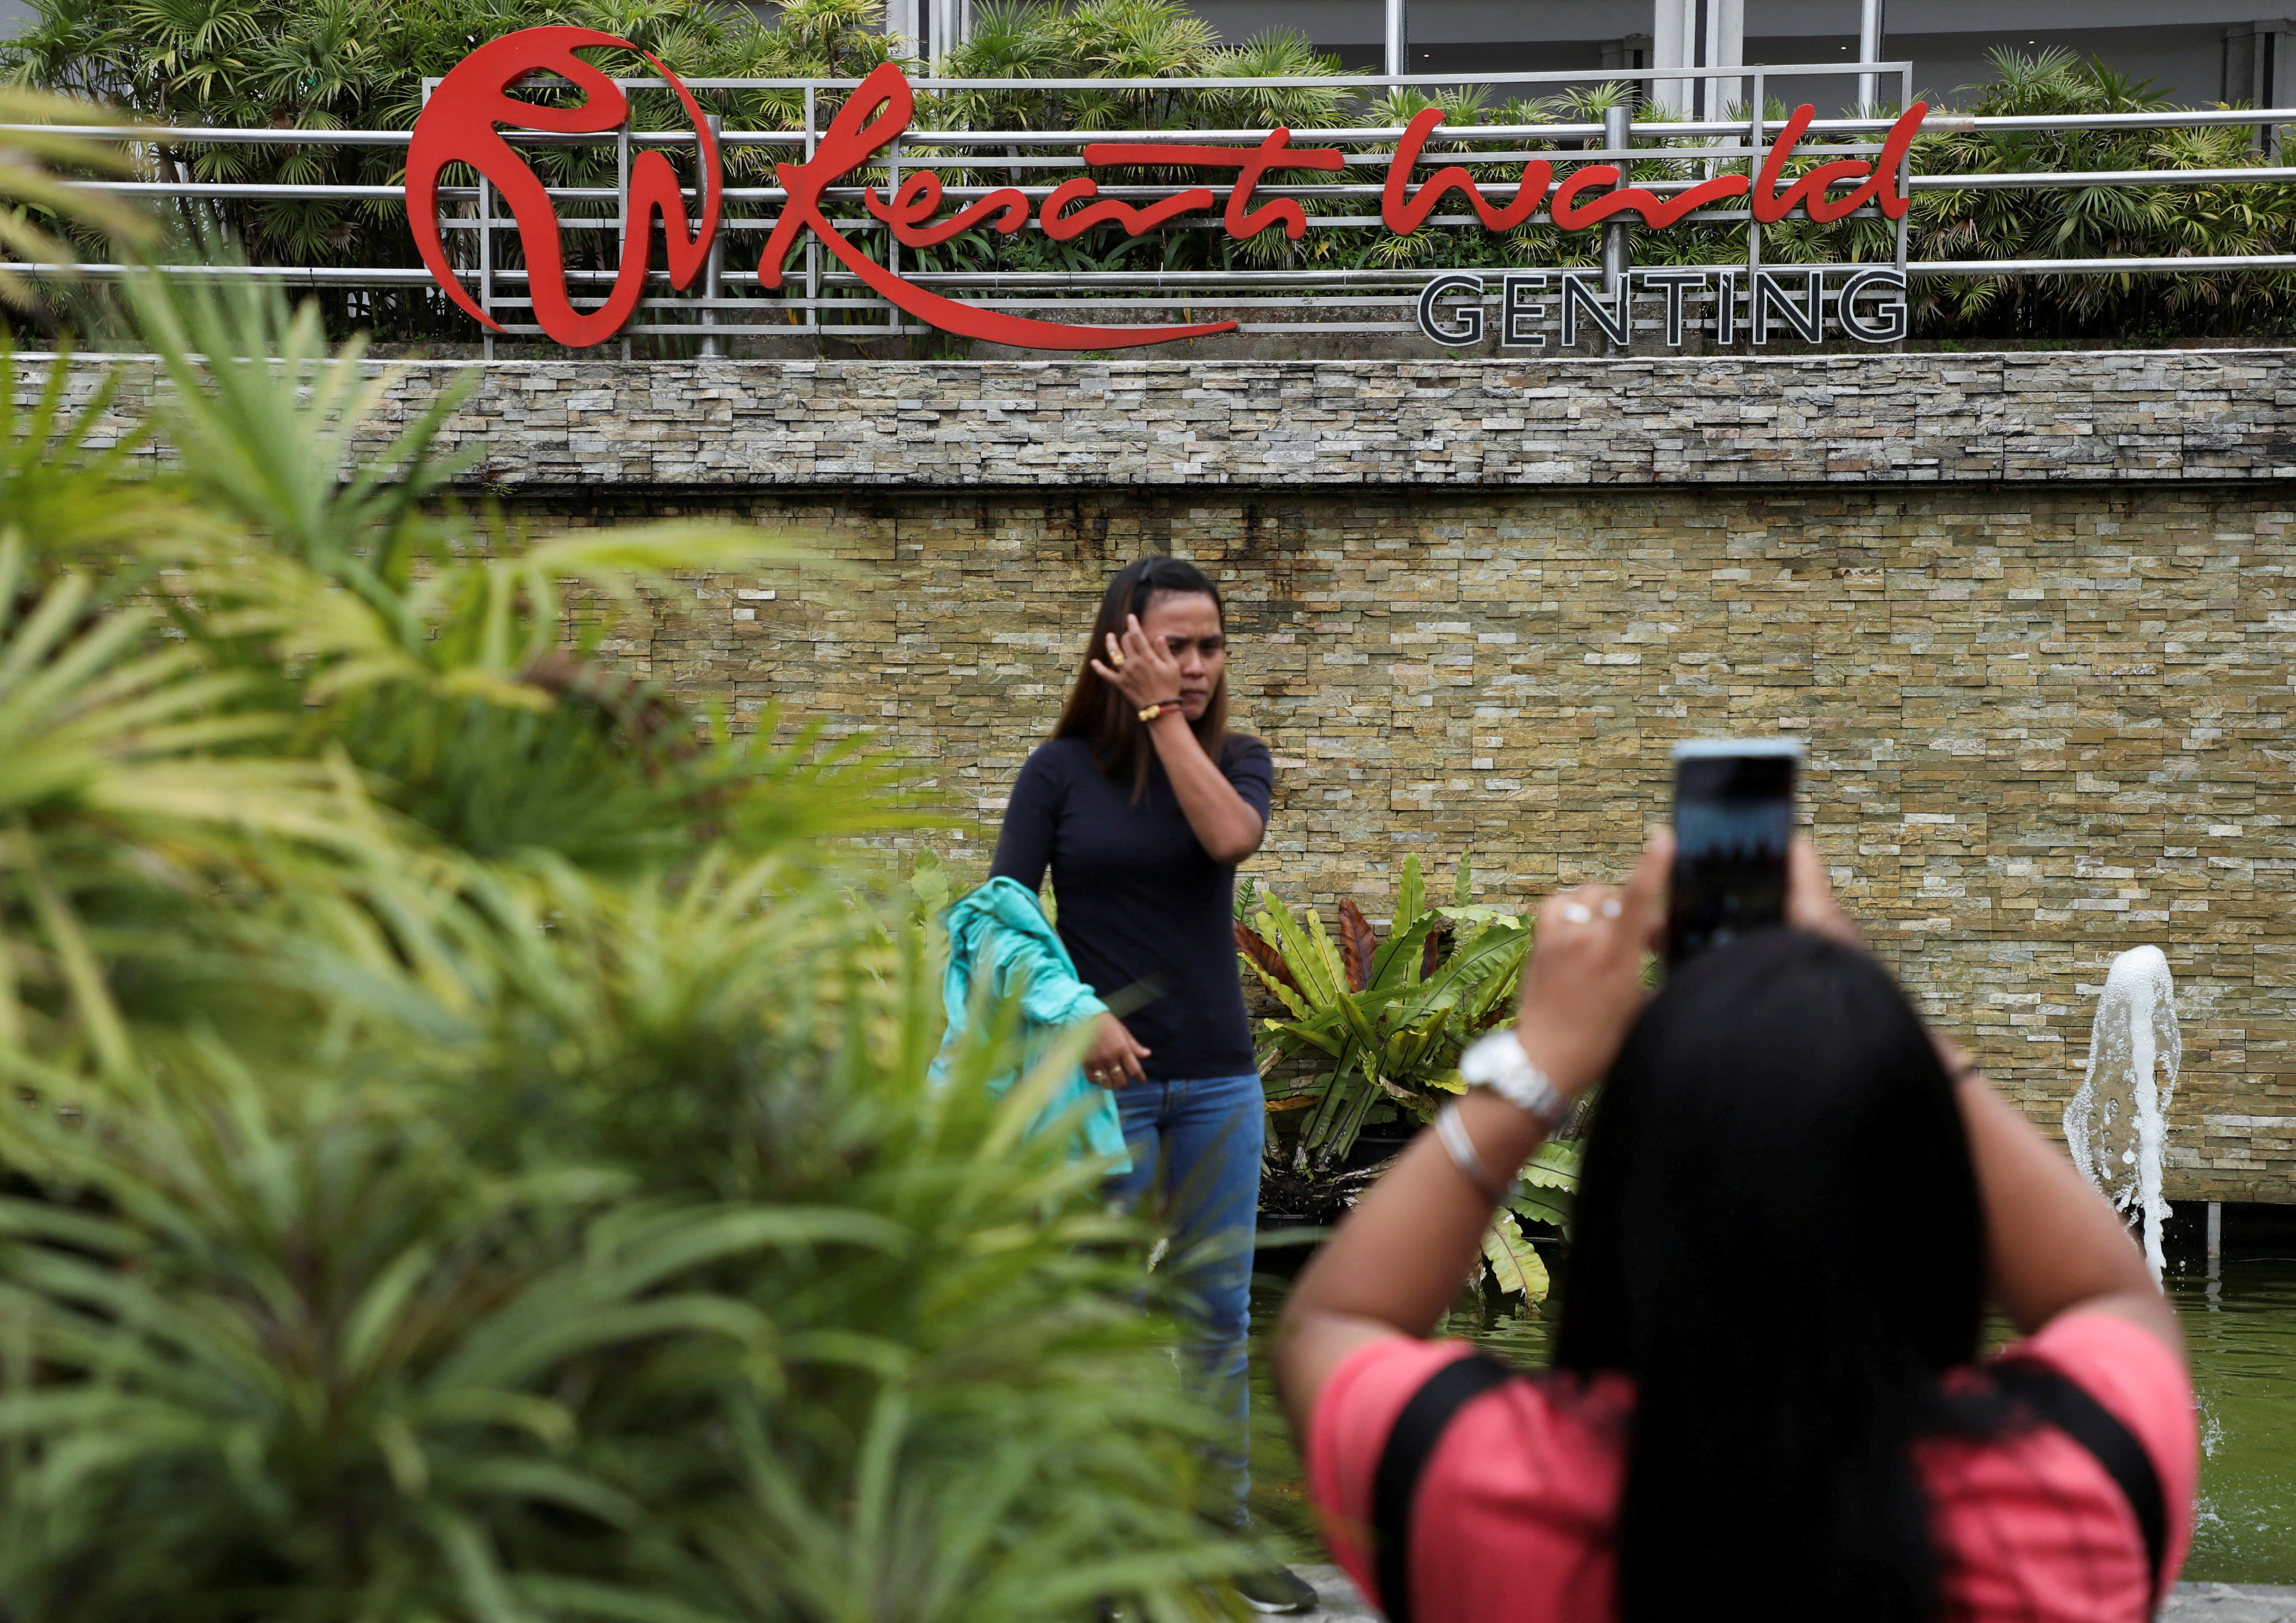 Visitors take picture with the signage of Genting Malaysia’s Resorts World in Genting Highlands